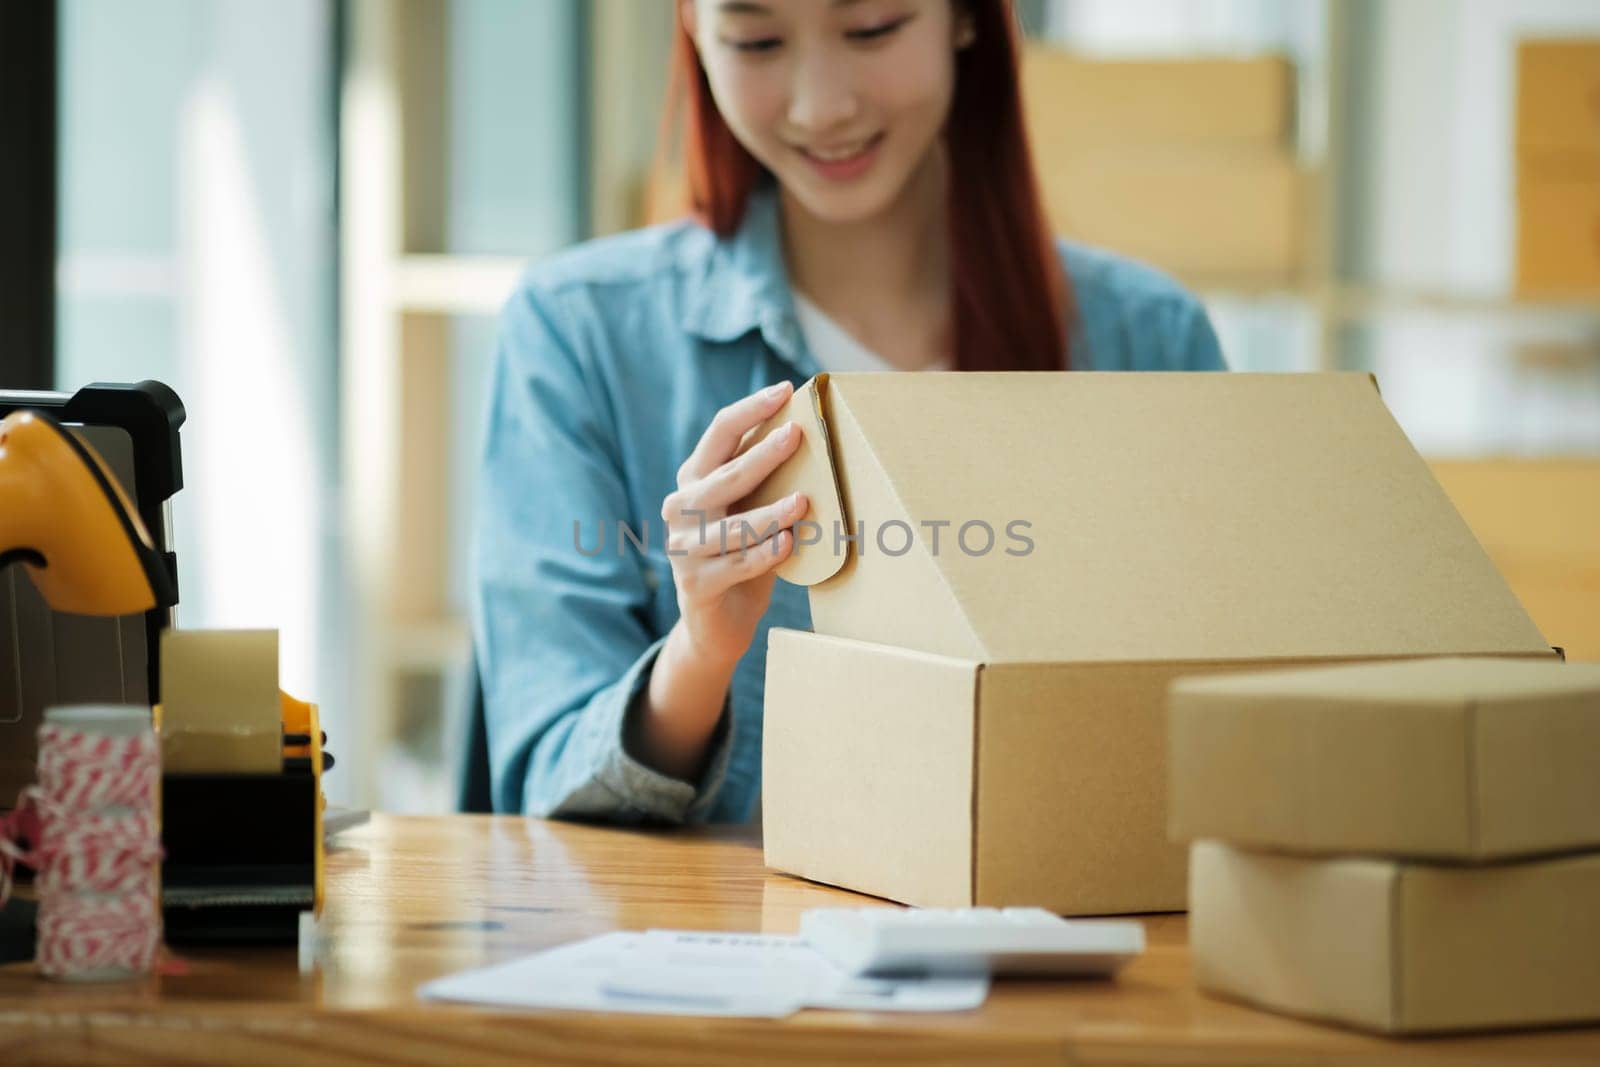 Smiling female entrepreneur packing clothing items for shipping in her startup workshop.